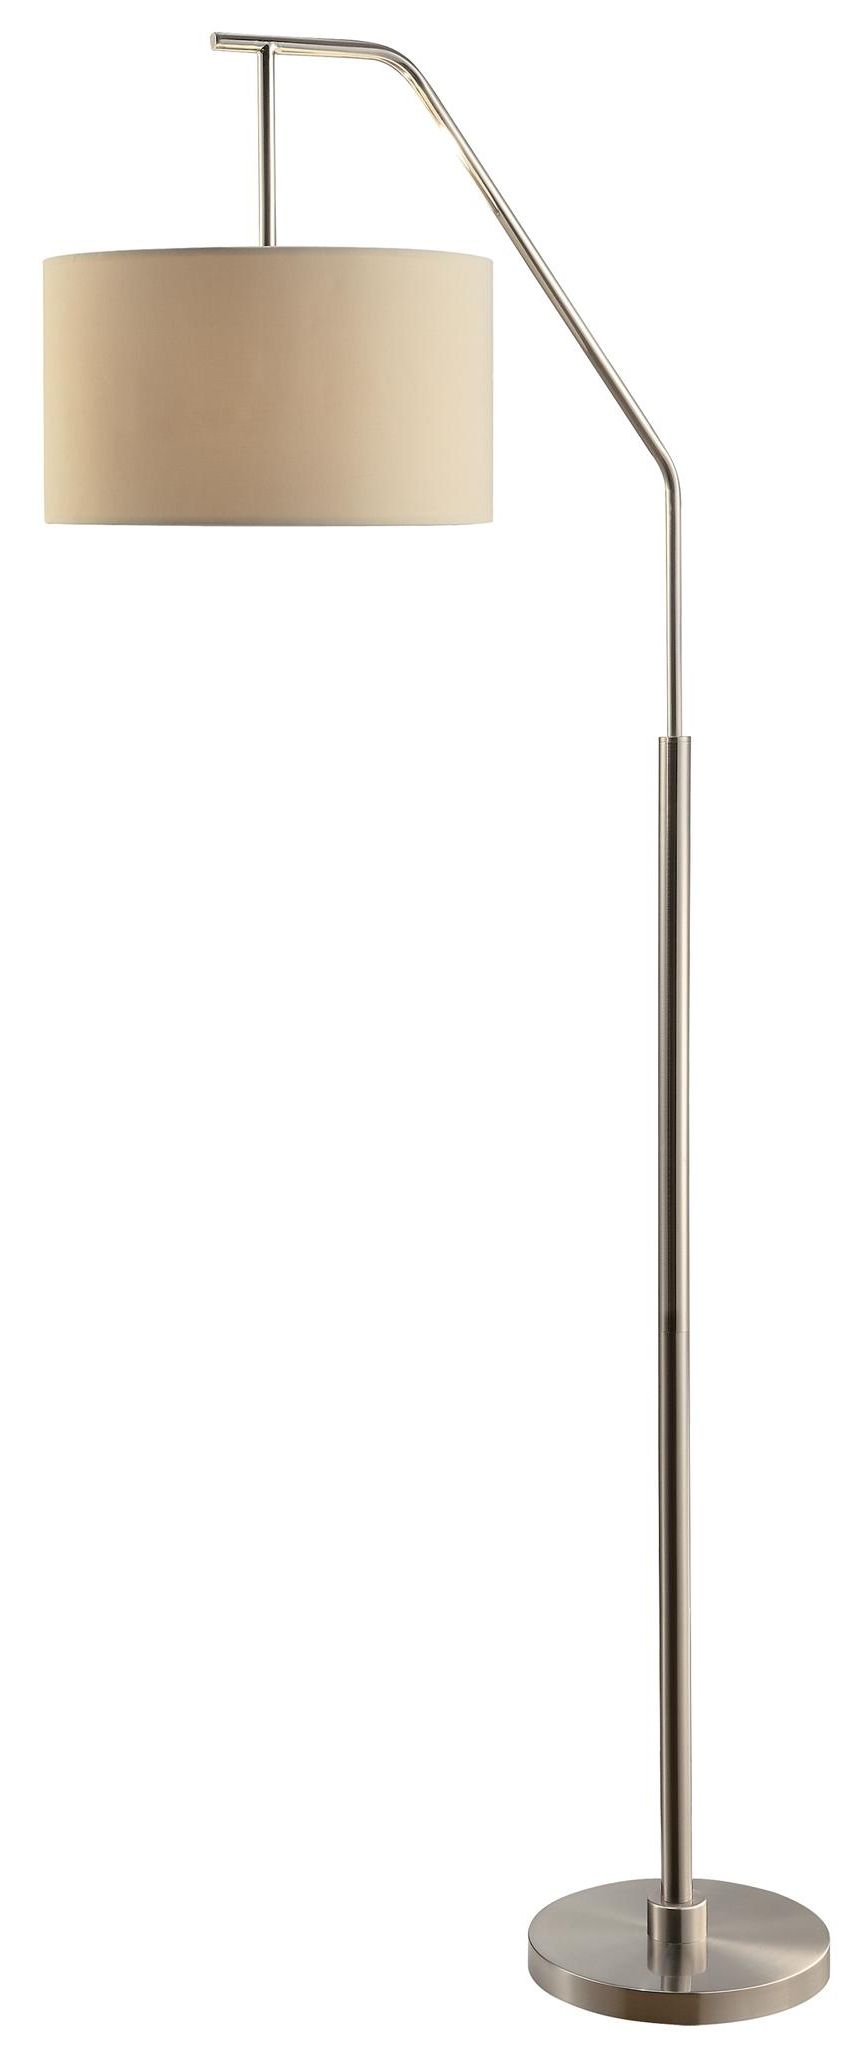 Best And Newest Dinsmore 72 Inch Floor Lamp, Brushed Nickel – Walmart Within 72 Inch Standing Lamps (View 1 of 15)